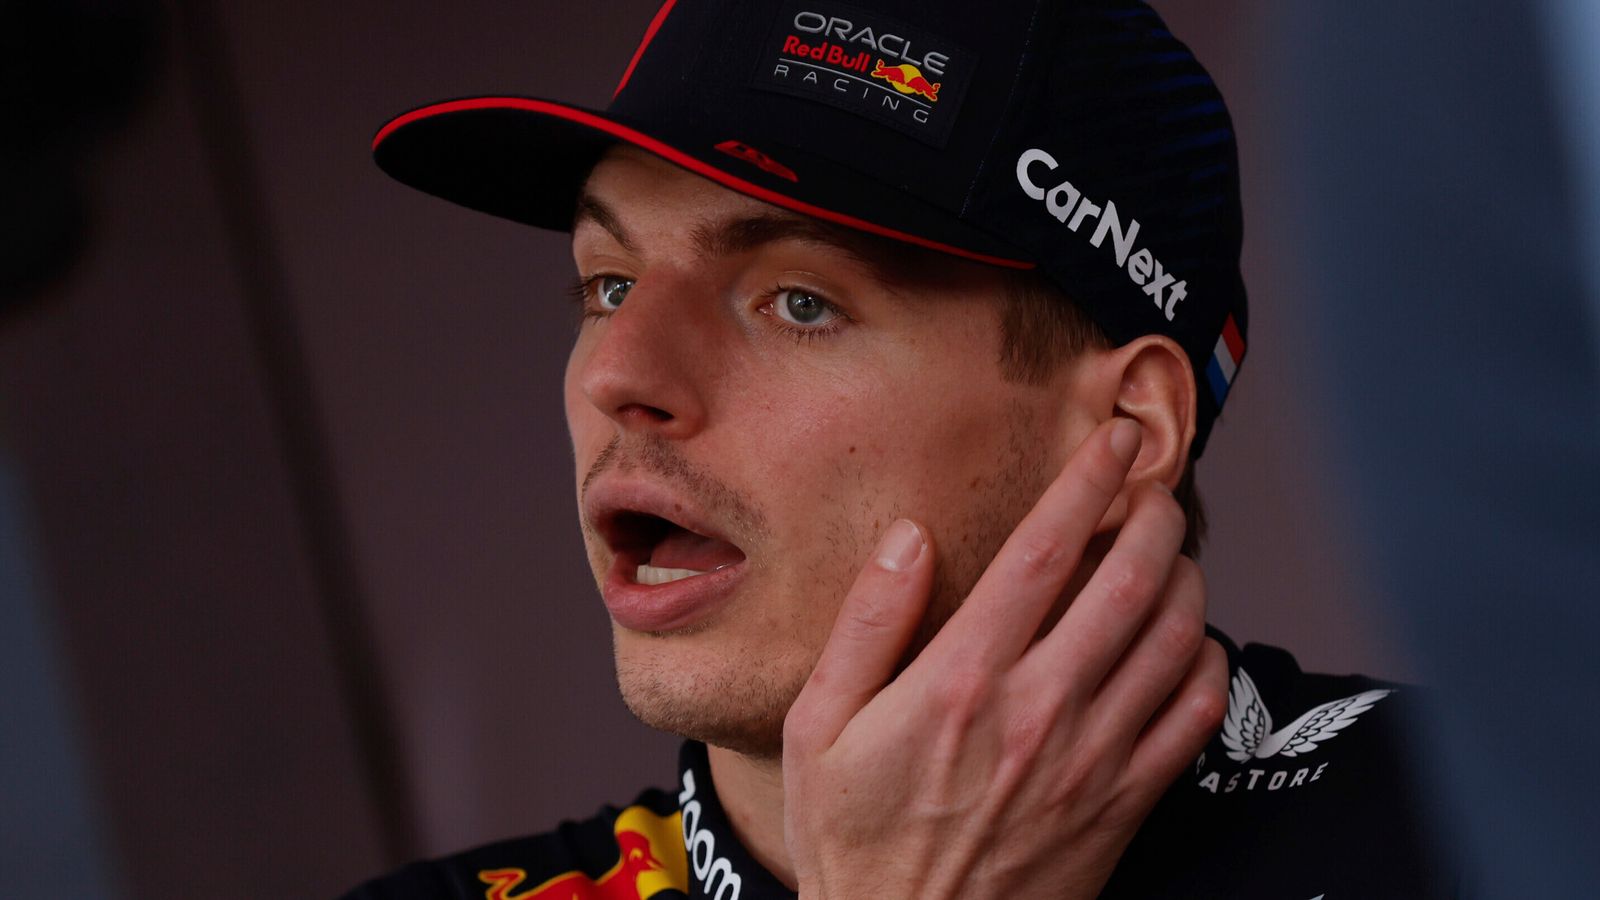 Max Verstappen feels Red Bull needs more pace at the Monaco GP to stay ahead of Charles Leclerc and Carlos Sainz